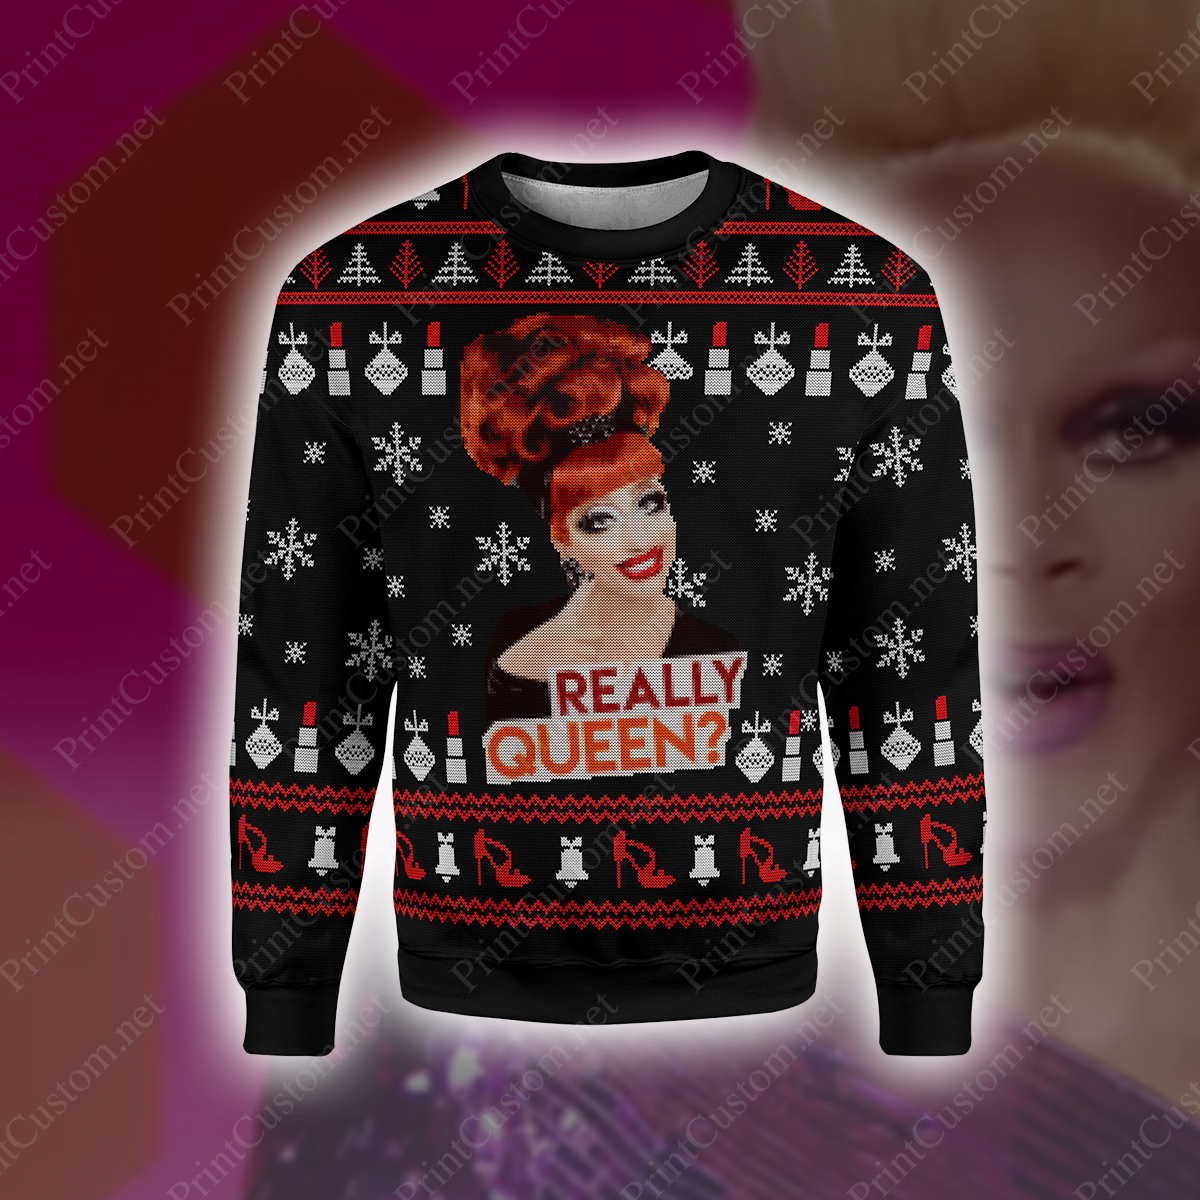 Really queen rupaul's drag race full printing ugly christmas sweater 4